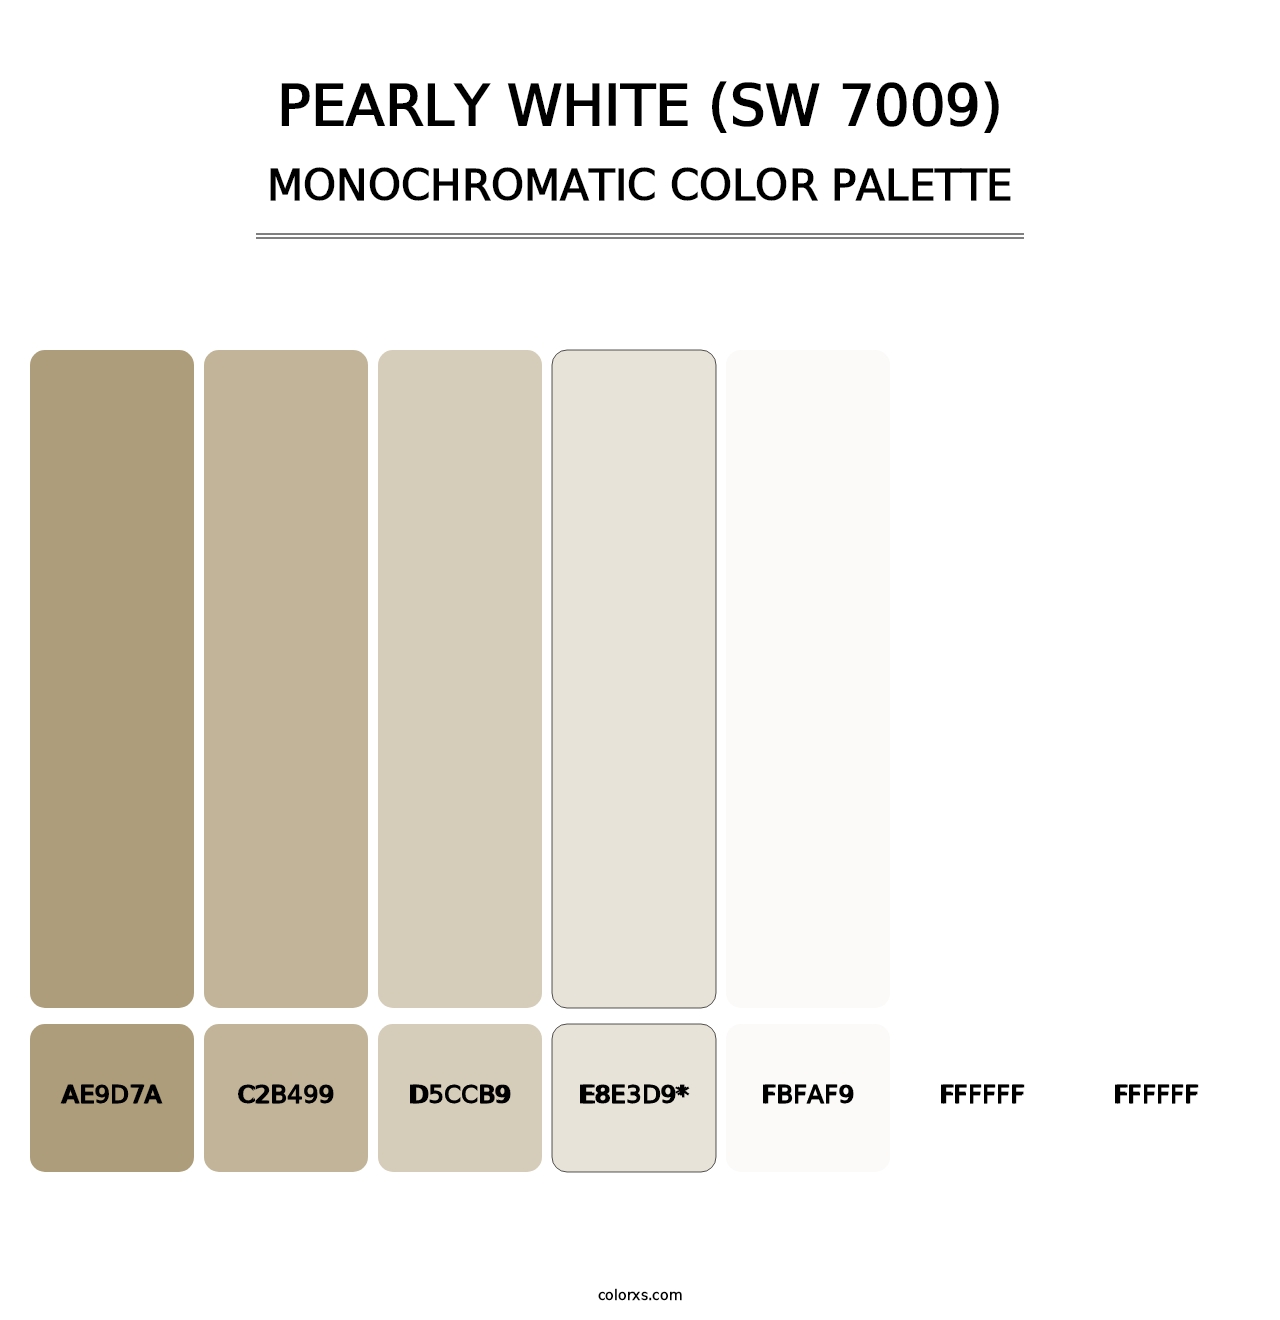 Pearly White (SW 7009) - Monochromatic Color Palette